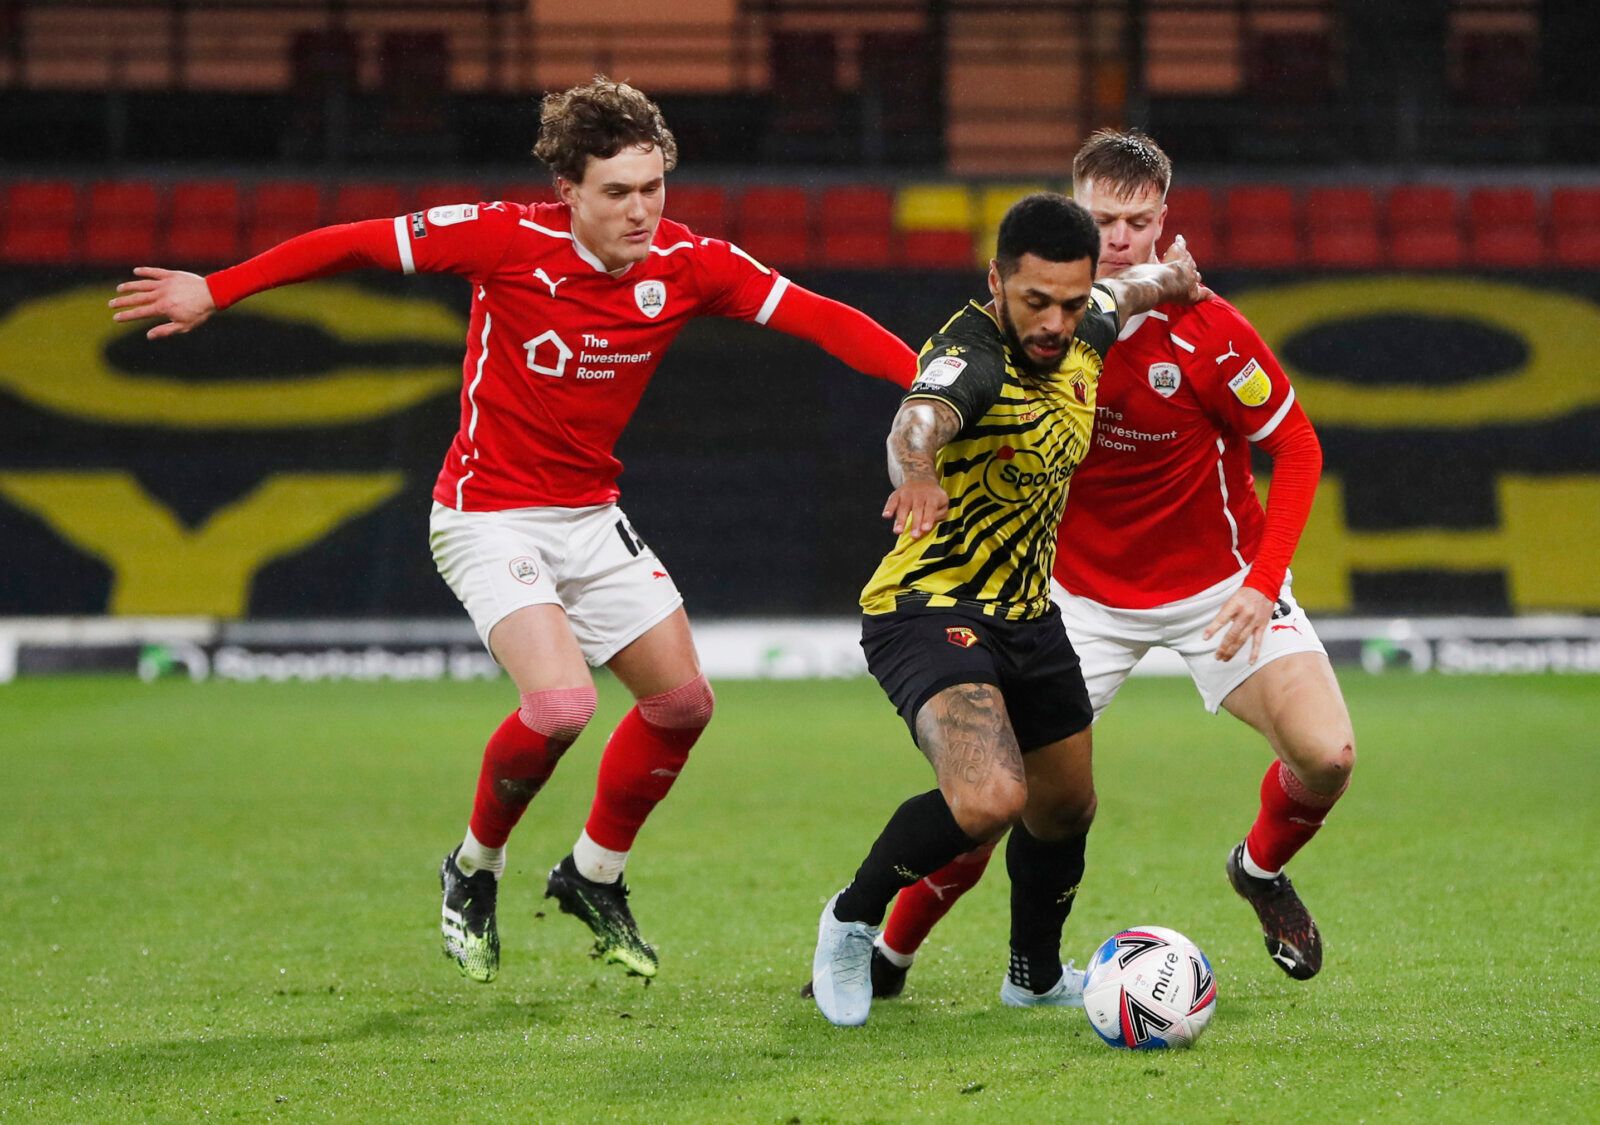 Soccer Football - Championship - Watford v Barnsley - Vicarage Road, Watford, Britain - January 19, 2021 Watford's Andre Gray in action with Barnsley's Mads Andersen and Callum Styles Action Images/Paul Childs EDITORIAL USE ONLY. No use with unauthorized audio, video, data, fixture lists, club/league logos or 'live' services. Online in-match use limited to 75 images, no video emulation. No use in betting, games or single club /league/player publications.  Please contact your account representati